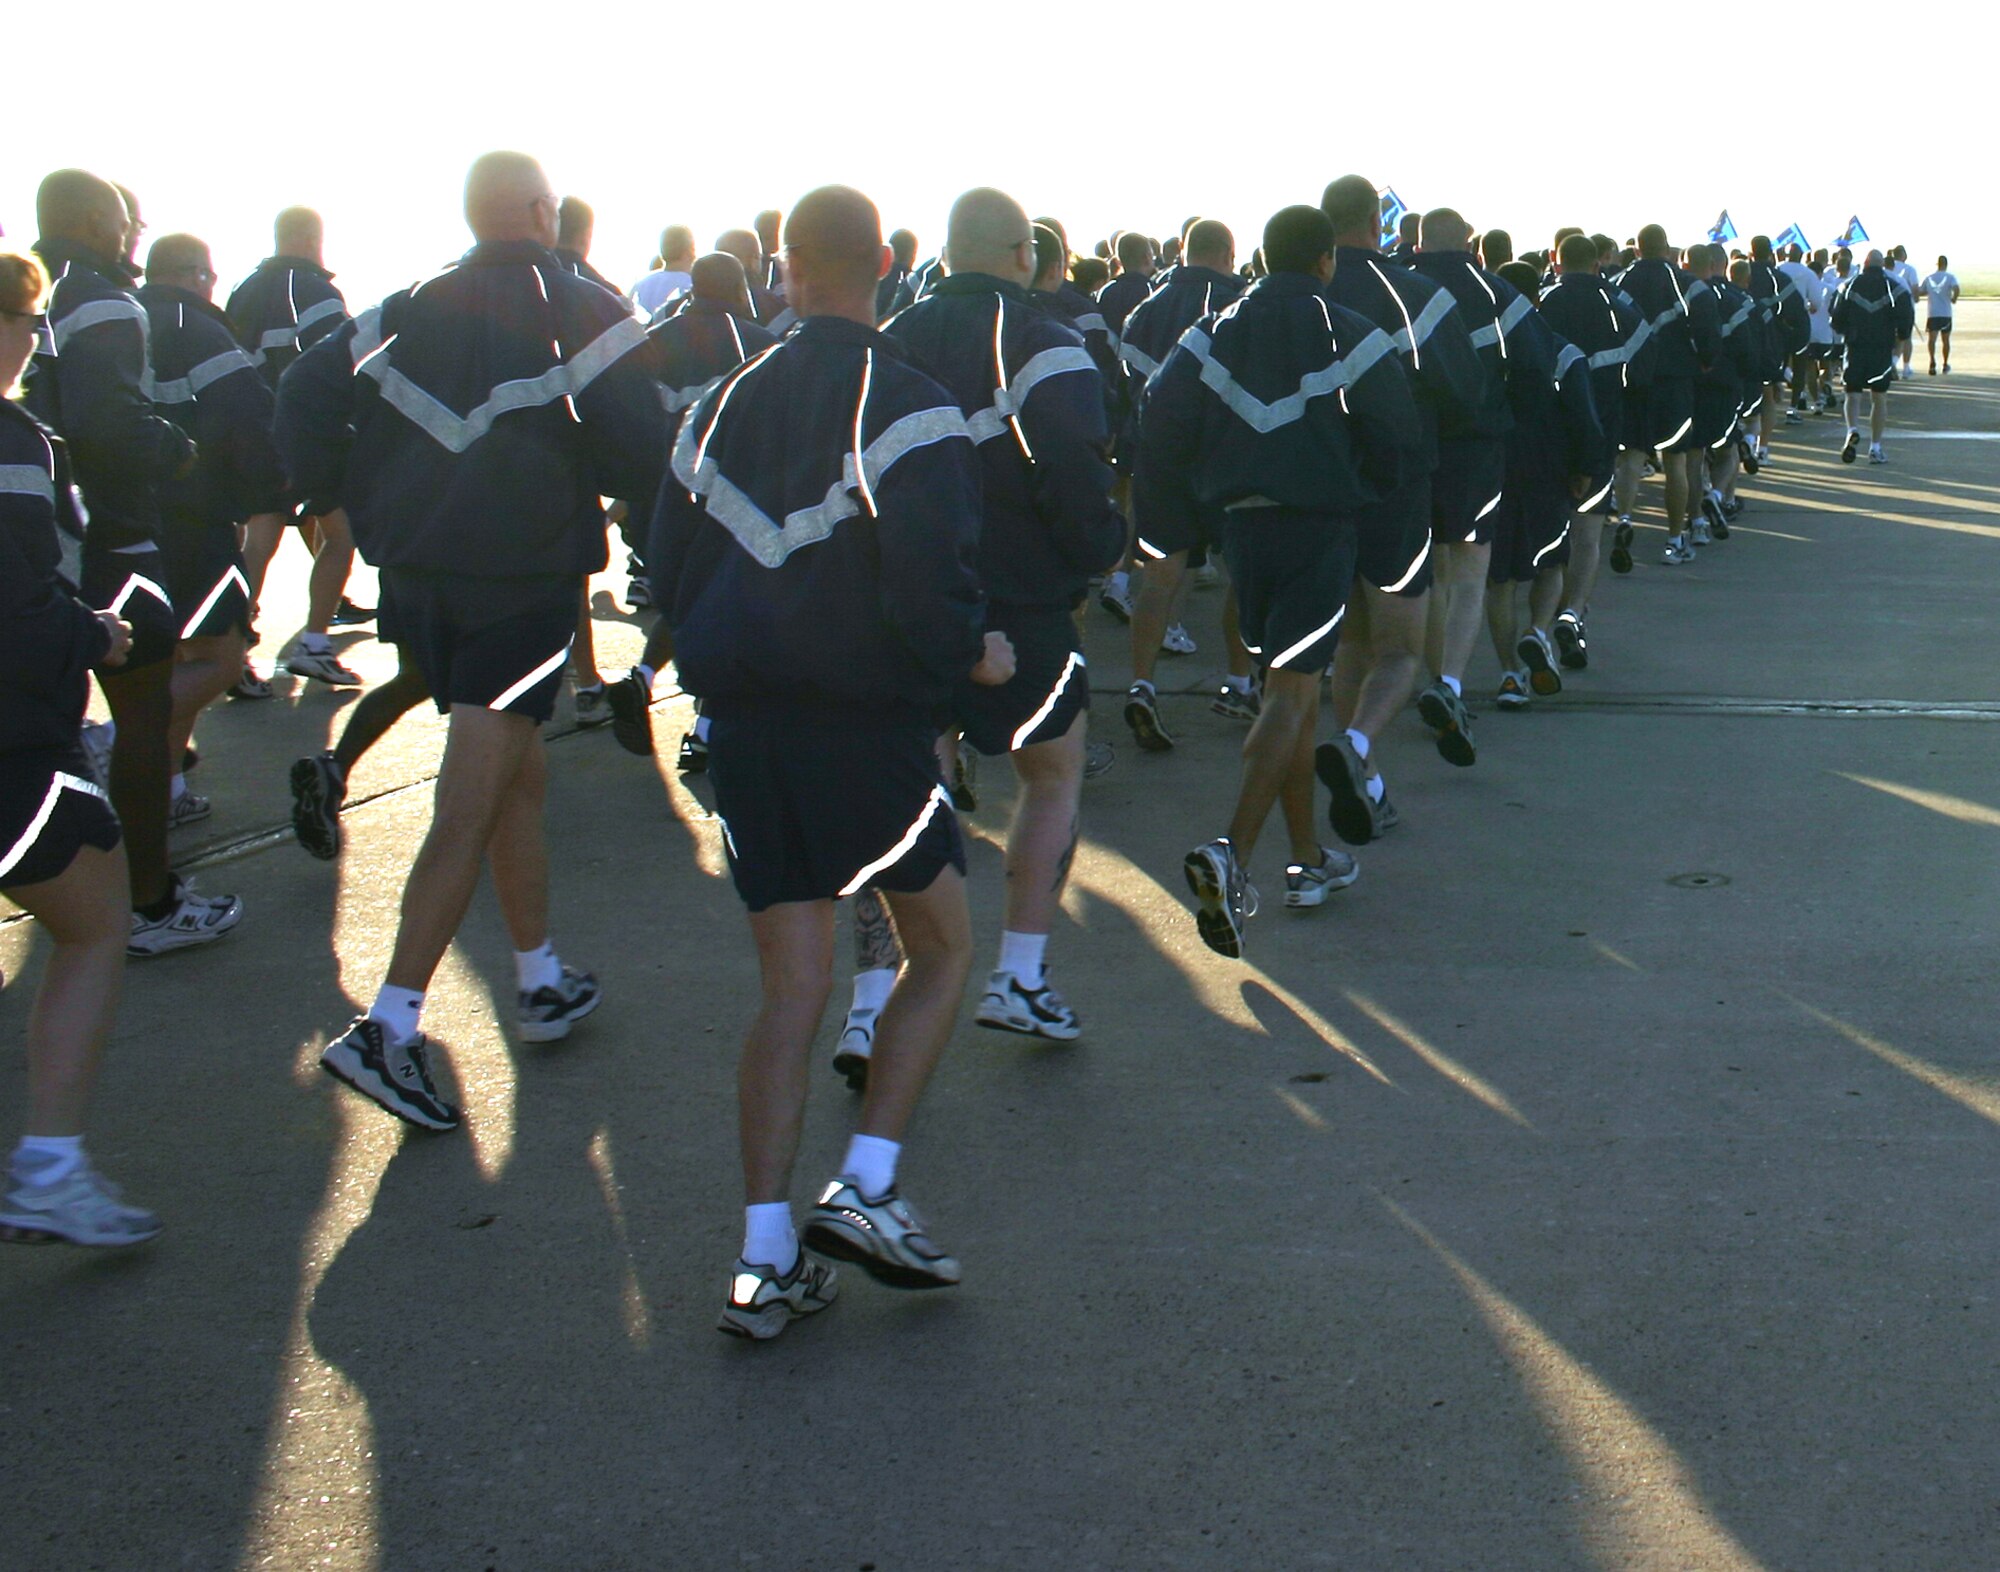 CANNON AIR FORCE BASE, N.M. -- Airmen begin their two-mile commando run on the base flightline Tuesday morning. Airmen from the 27th Special Operations Group and 27th Special Operations Maintenance Group participated in the run. (U.S. Air Force photo by Airman Elliott Sprehe)